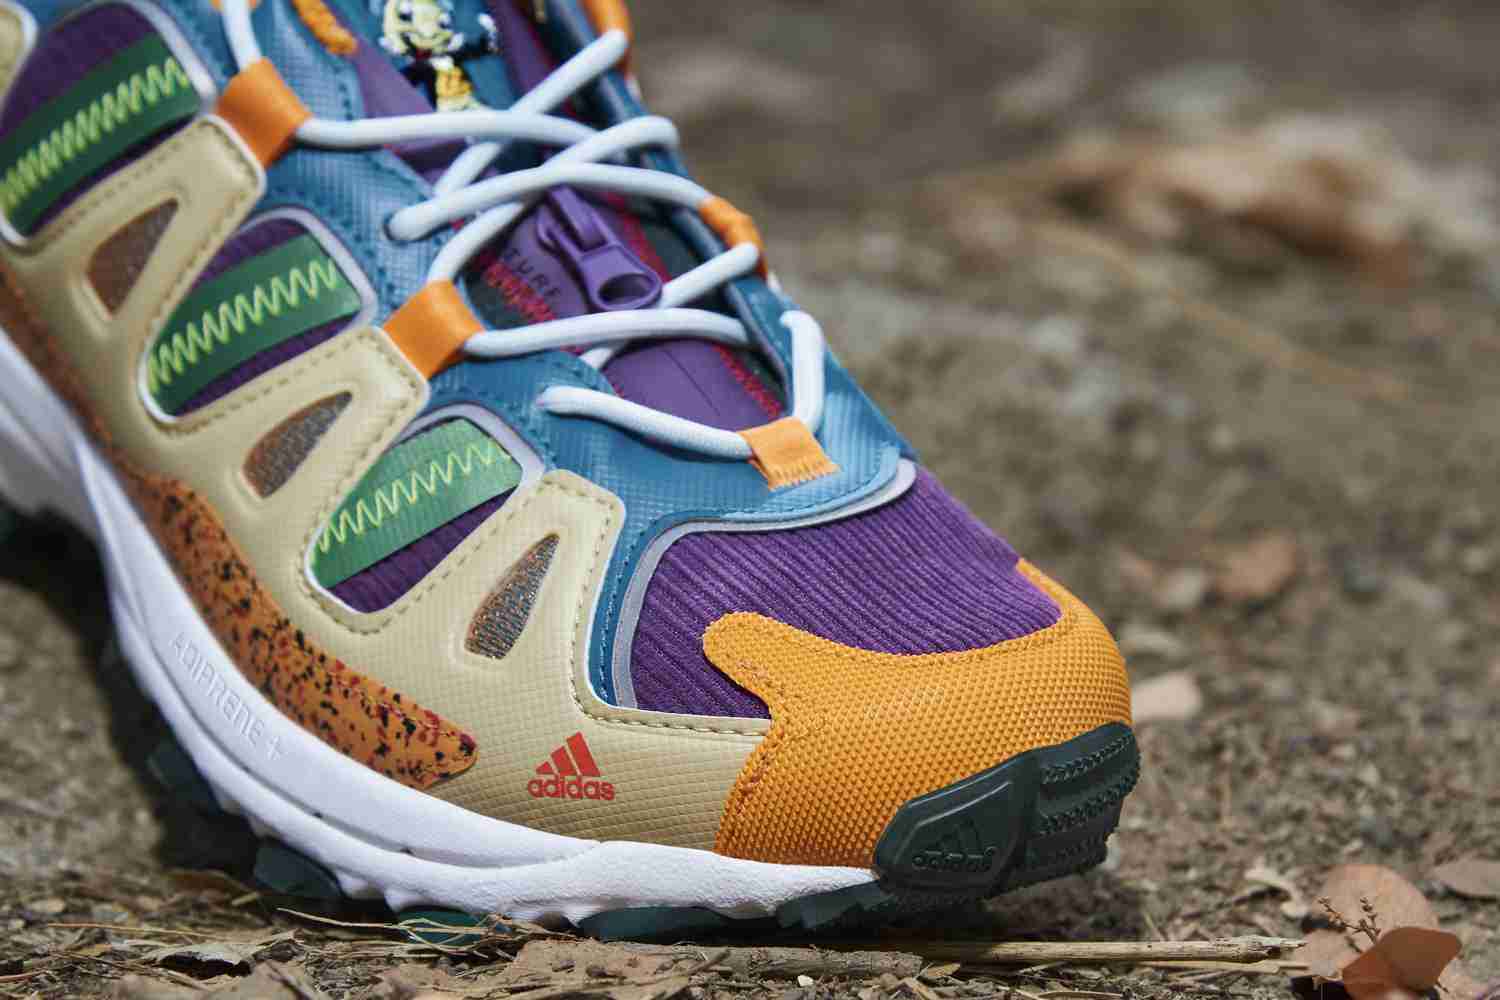 Sean-wotherspoon Adidas originals superturf adventure sw jiminey cricket disney vegan sneakers release zipper pouch purple blue green orange recycled polyester materials